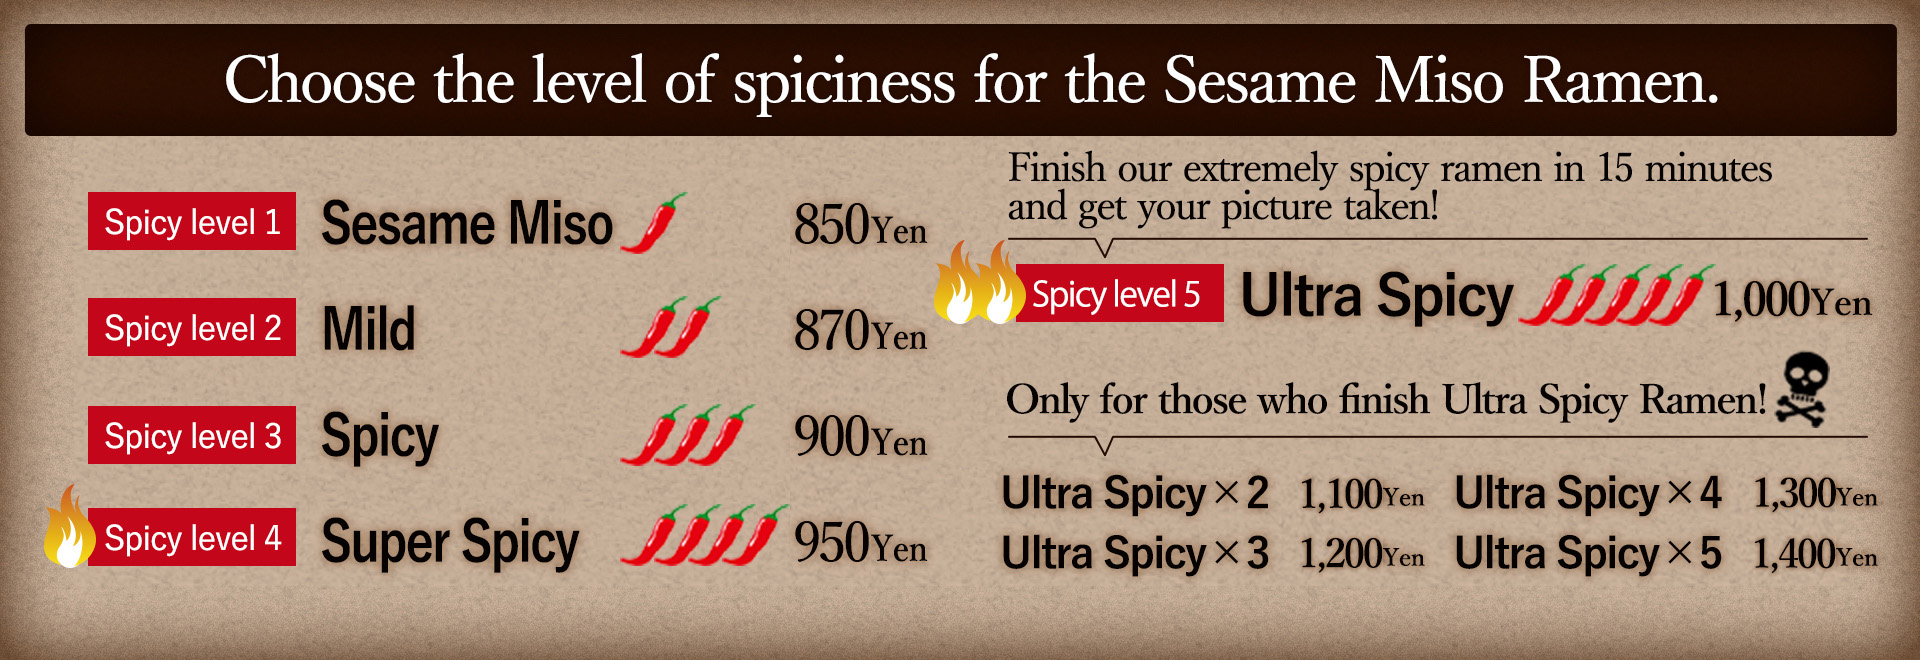 Choose the level of spiciness for the Sesame Miso Ramen.